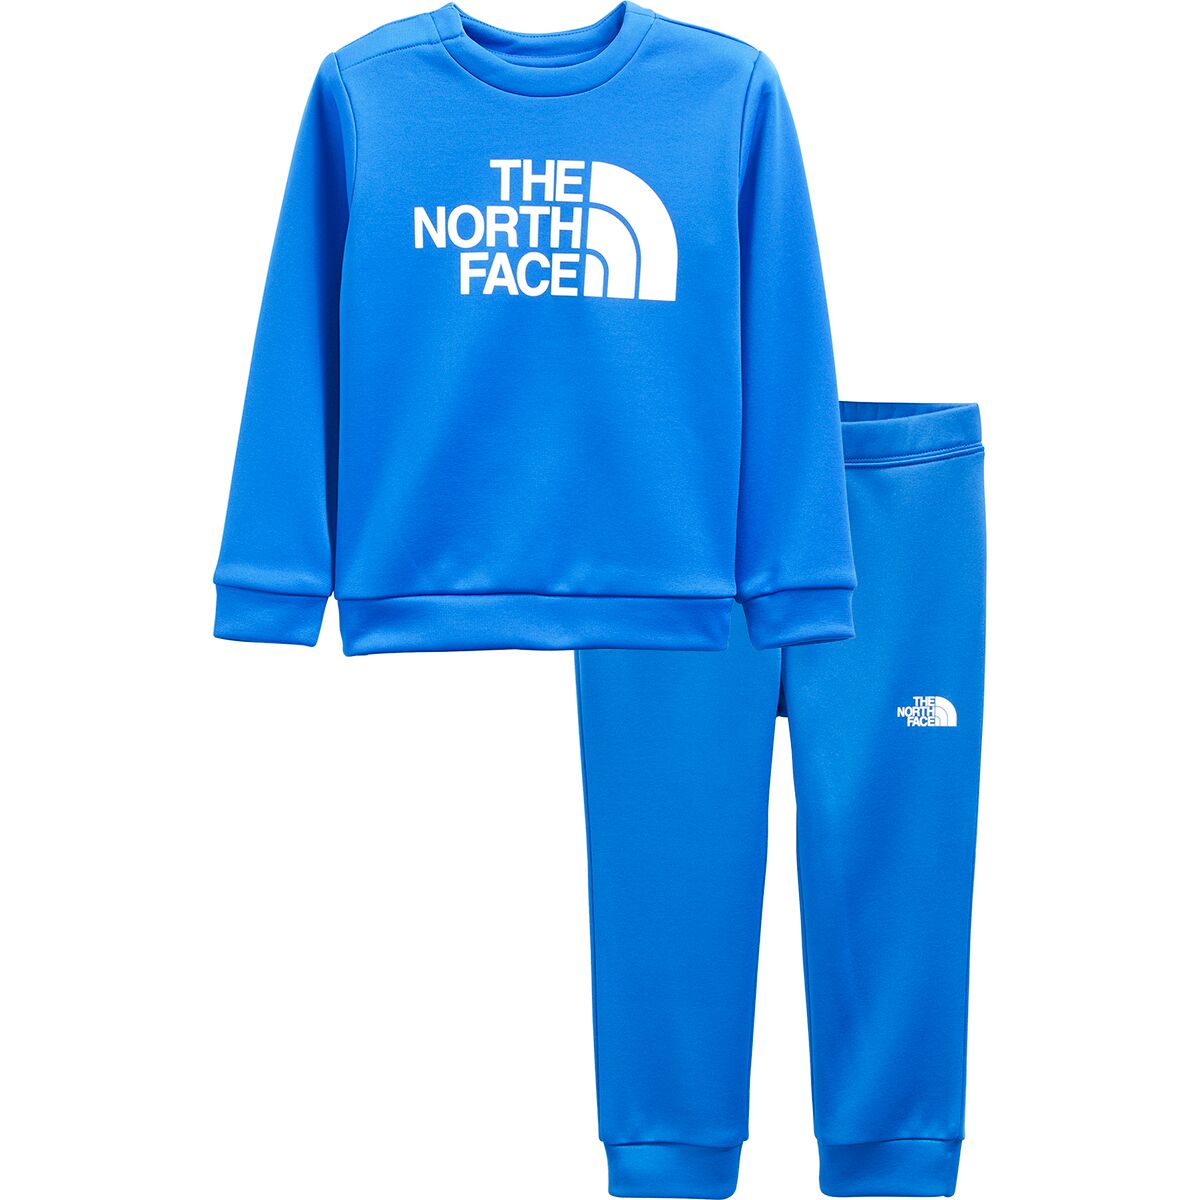 The North Face Surgent Crew Set - Toddler Boys' - Kids